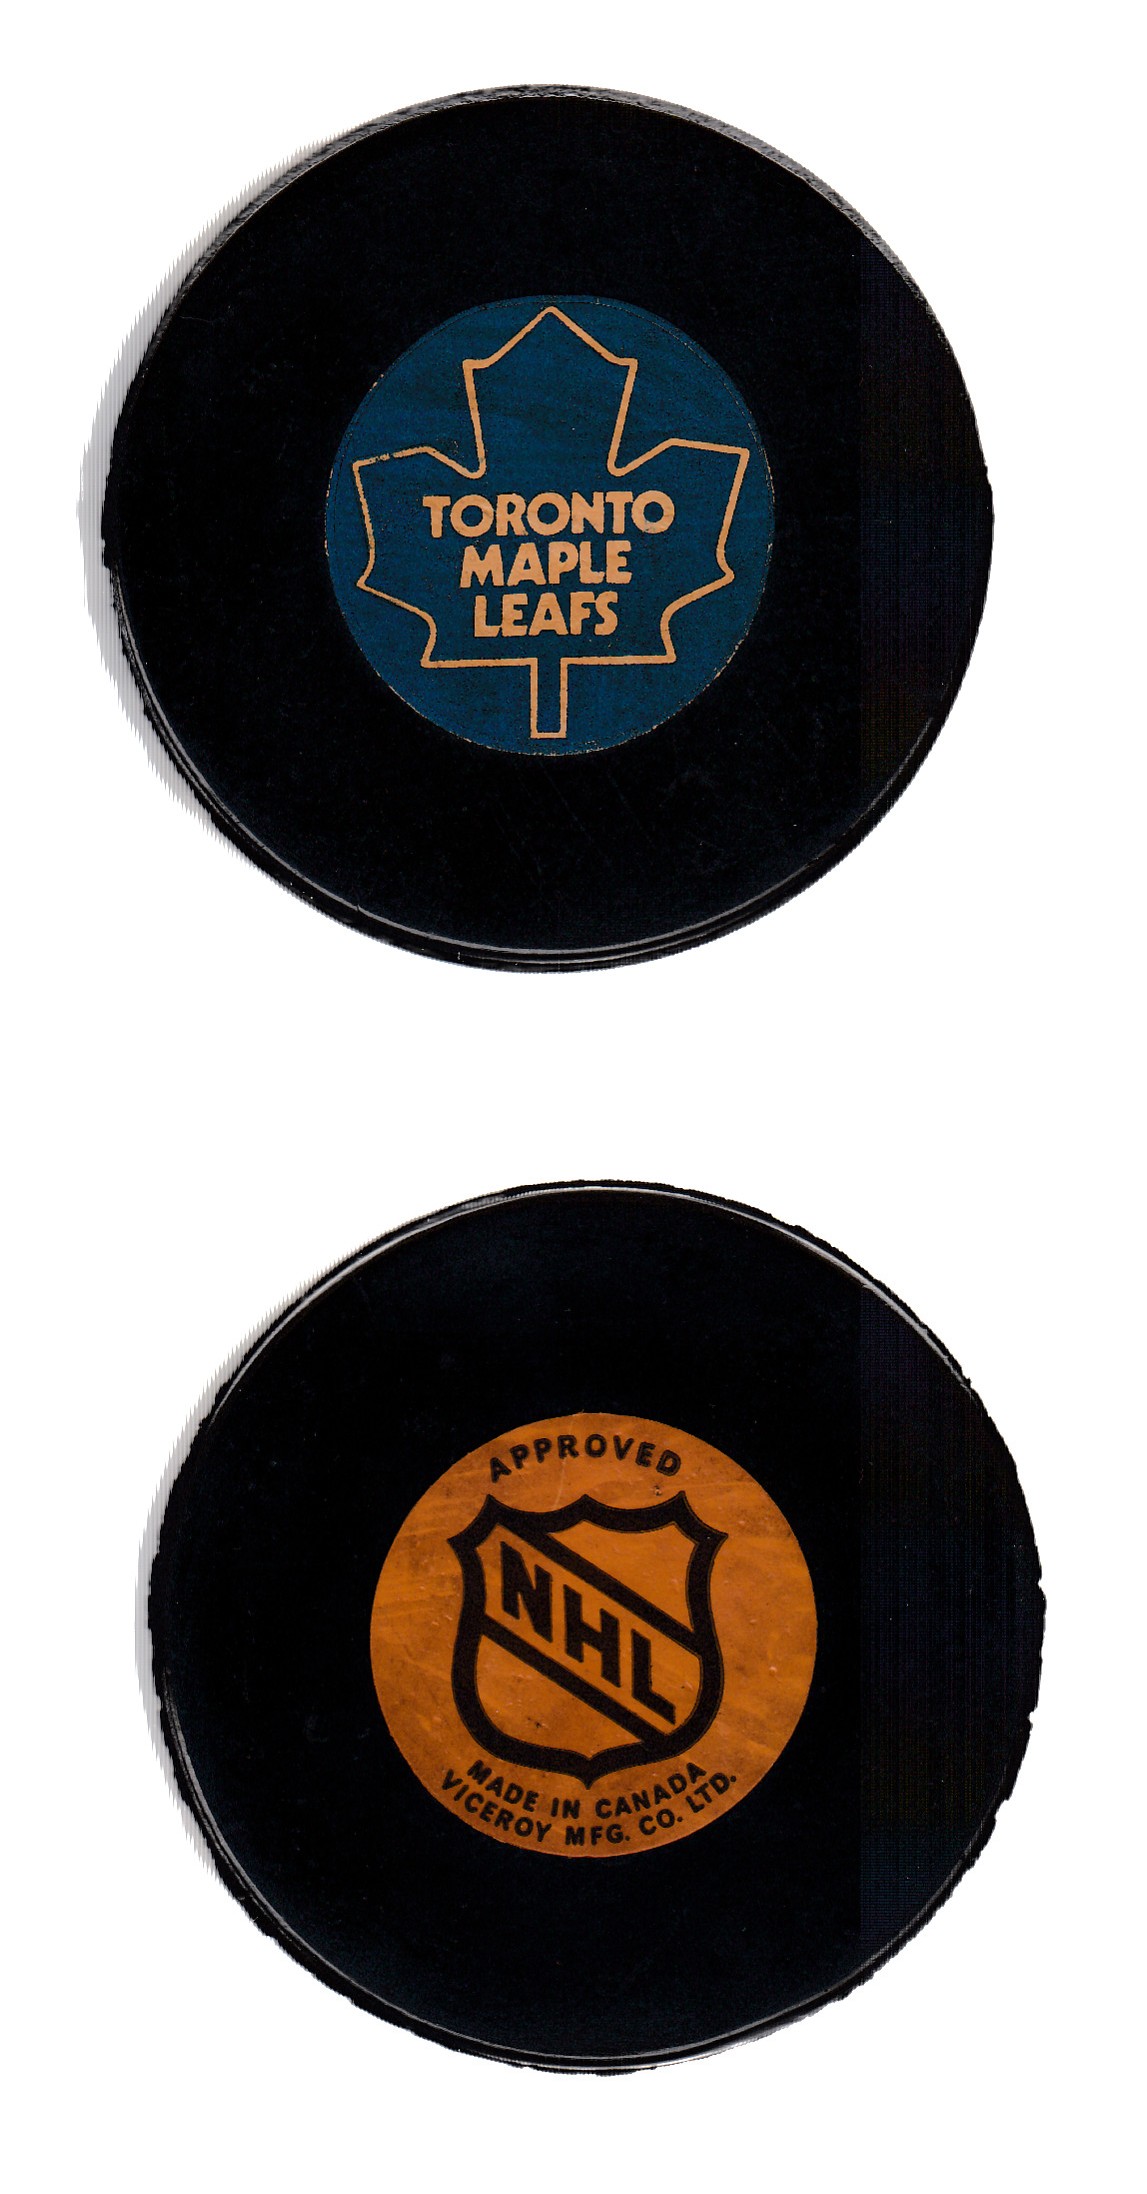 Toronto Maple Leafs official game puck